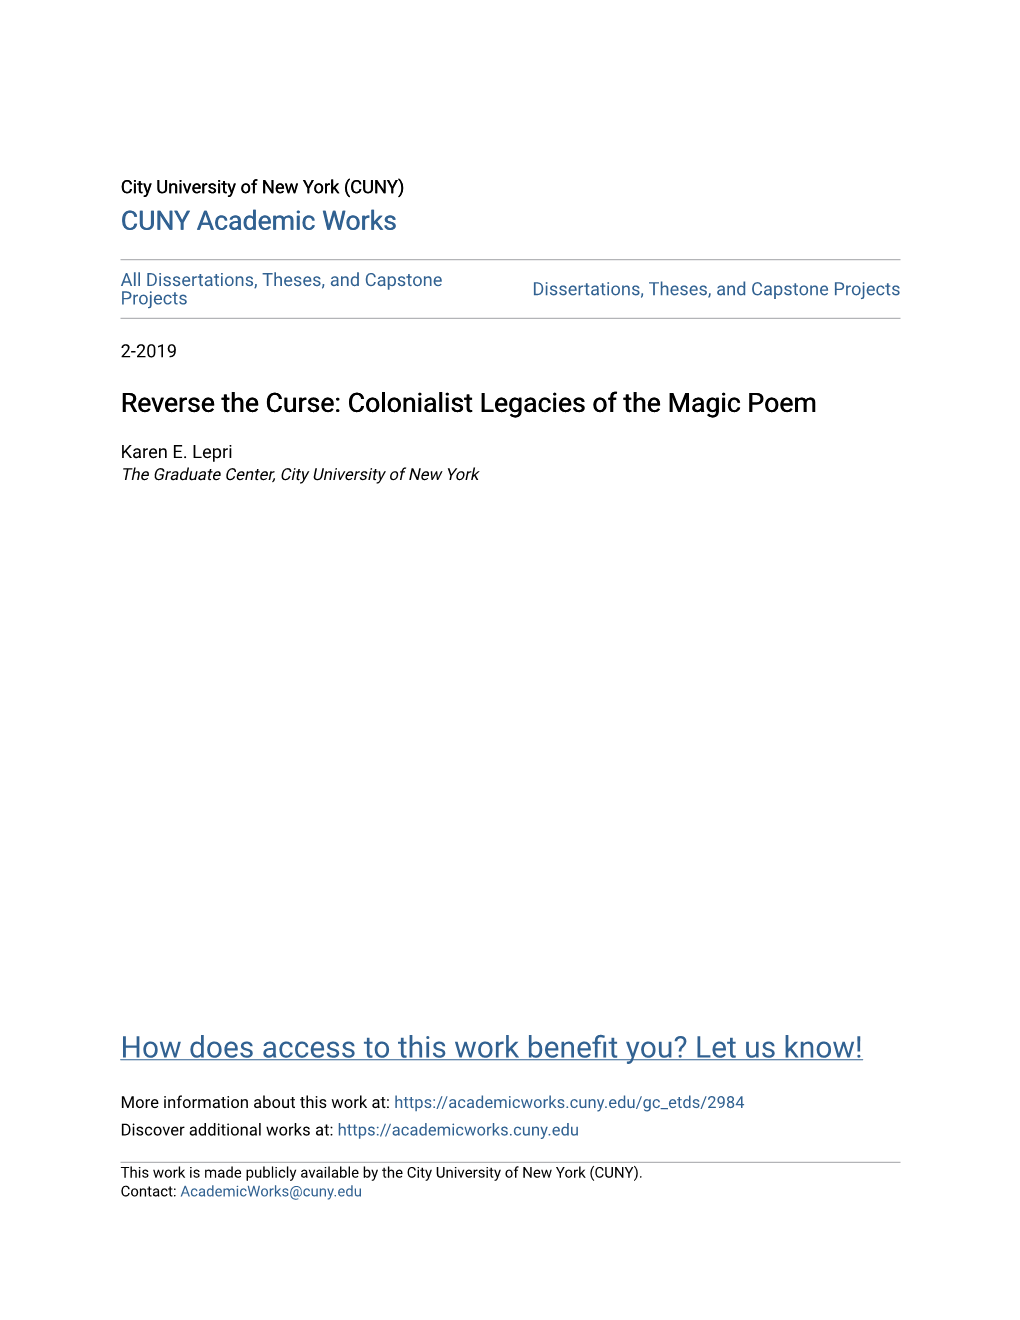 Reverse the Curse: Colonialist Legacies of the Magic Poem